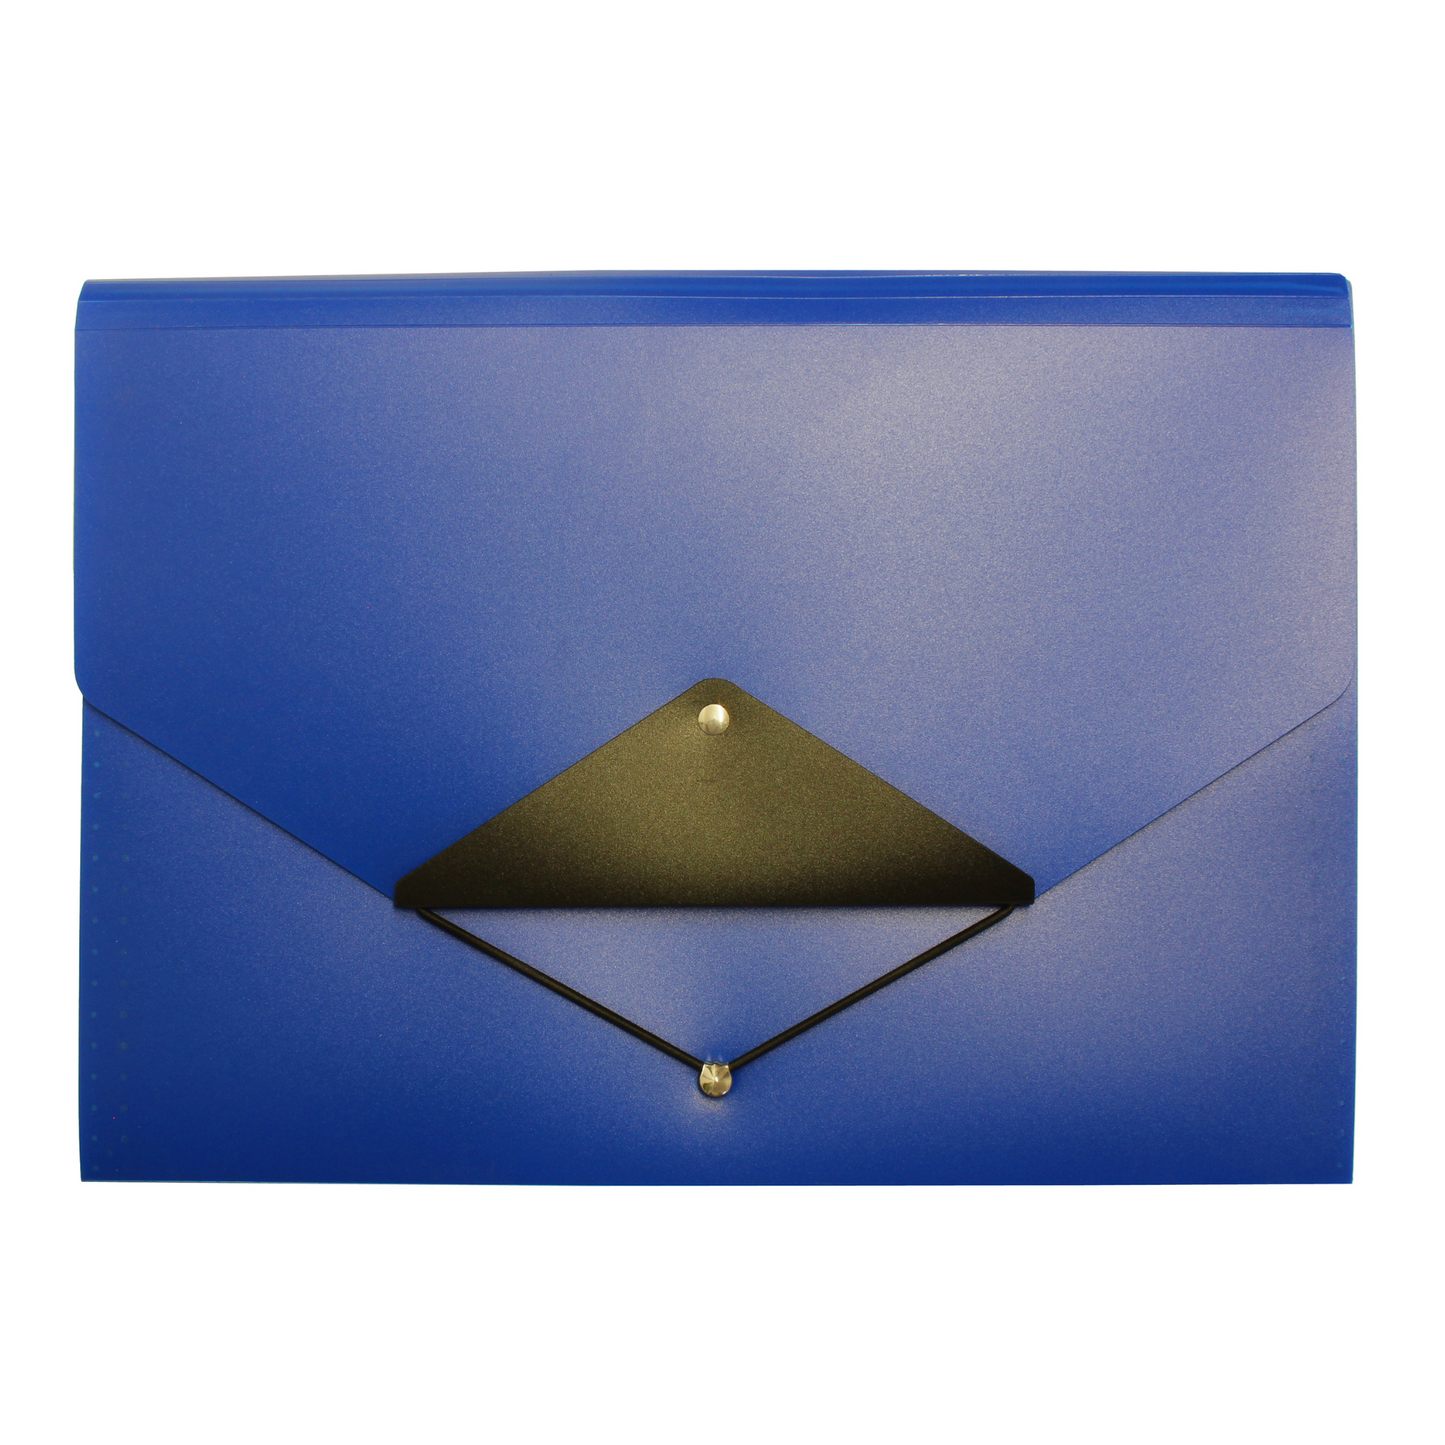 A bright blue envelope-style folder with a black triangular flap and an elastic closure. The folder's material has a subtle texture, and it is designed for document storage with a stylish and professional appearance.